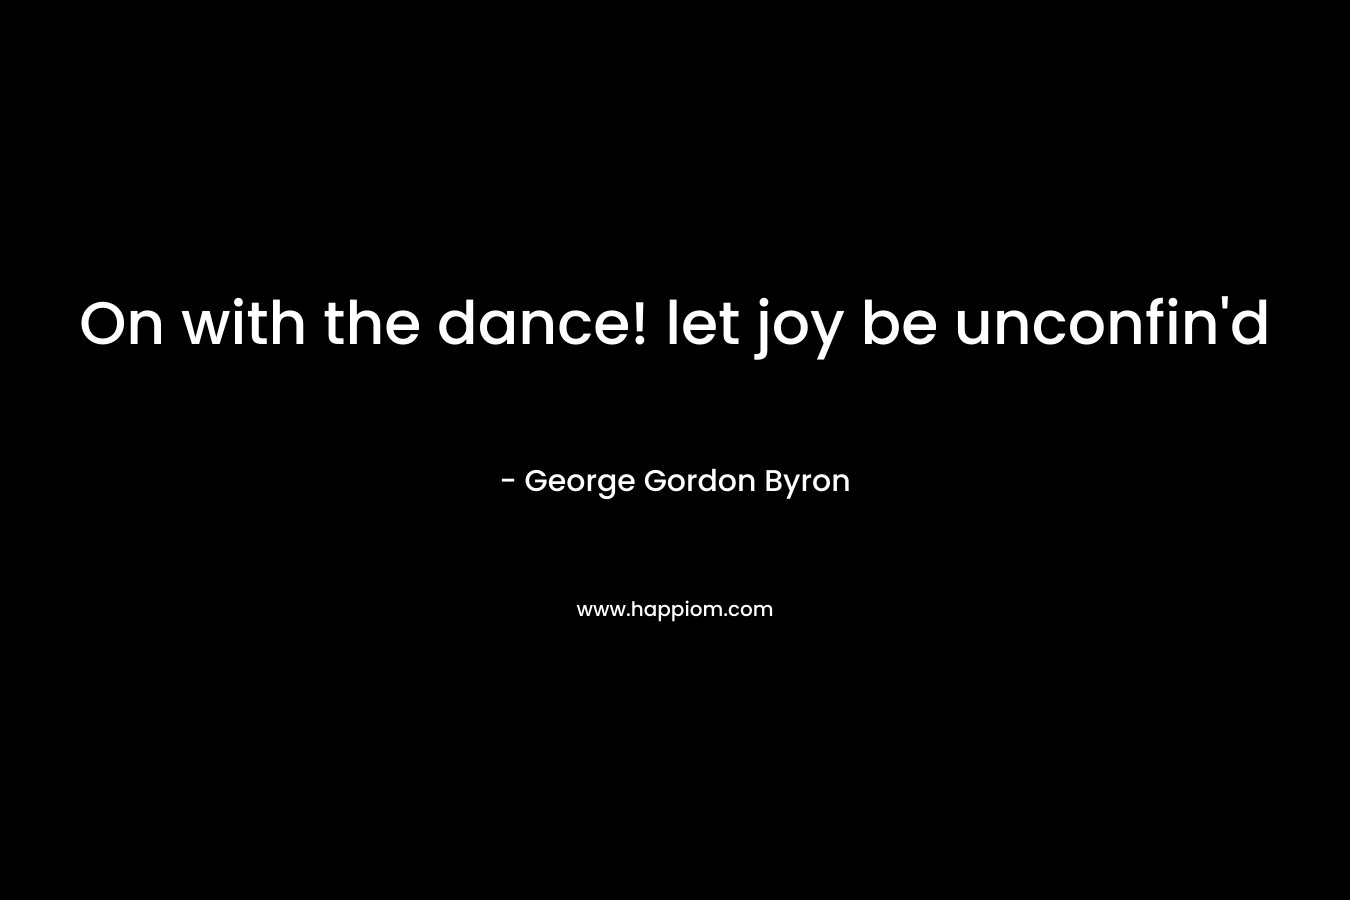 On with the dance! let joy be unconfin'd